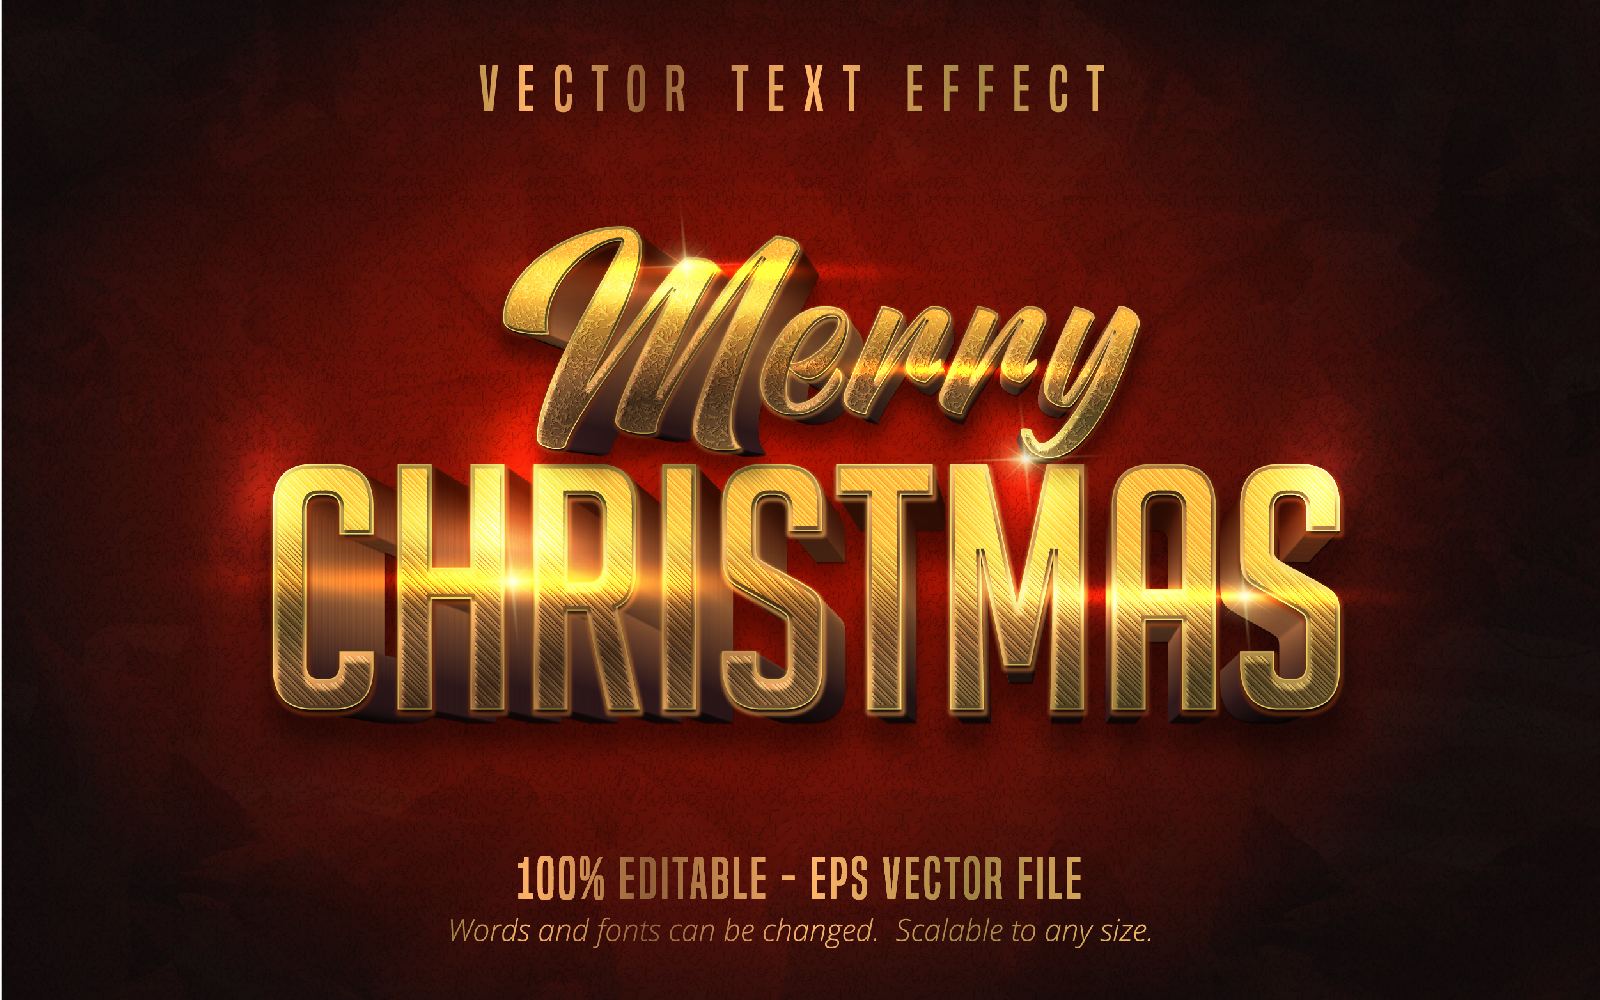 Merry Christmas - Editable Text Effect, Shiny Golden Text Style, Graphics Illustration